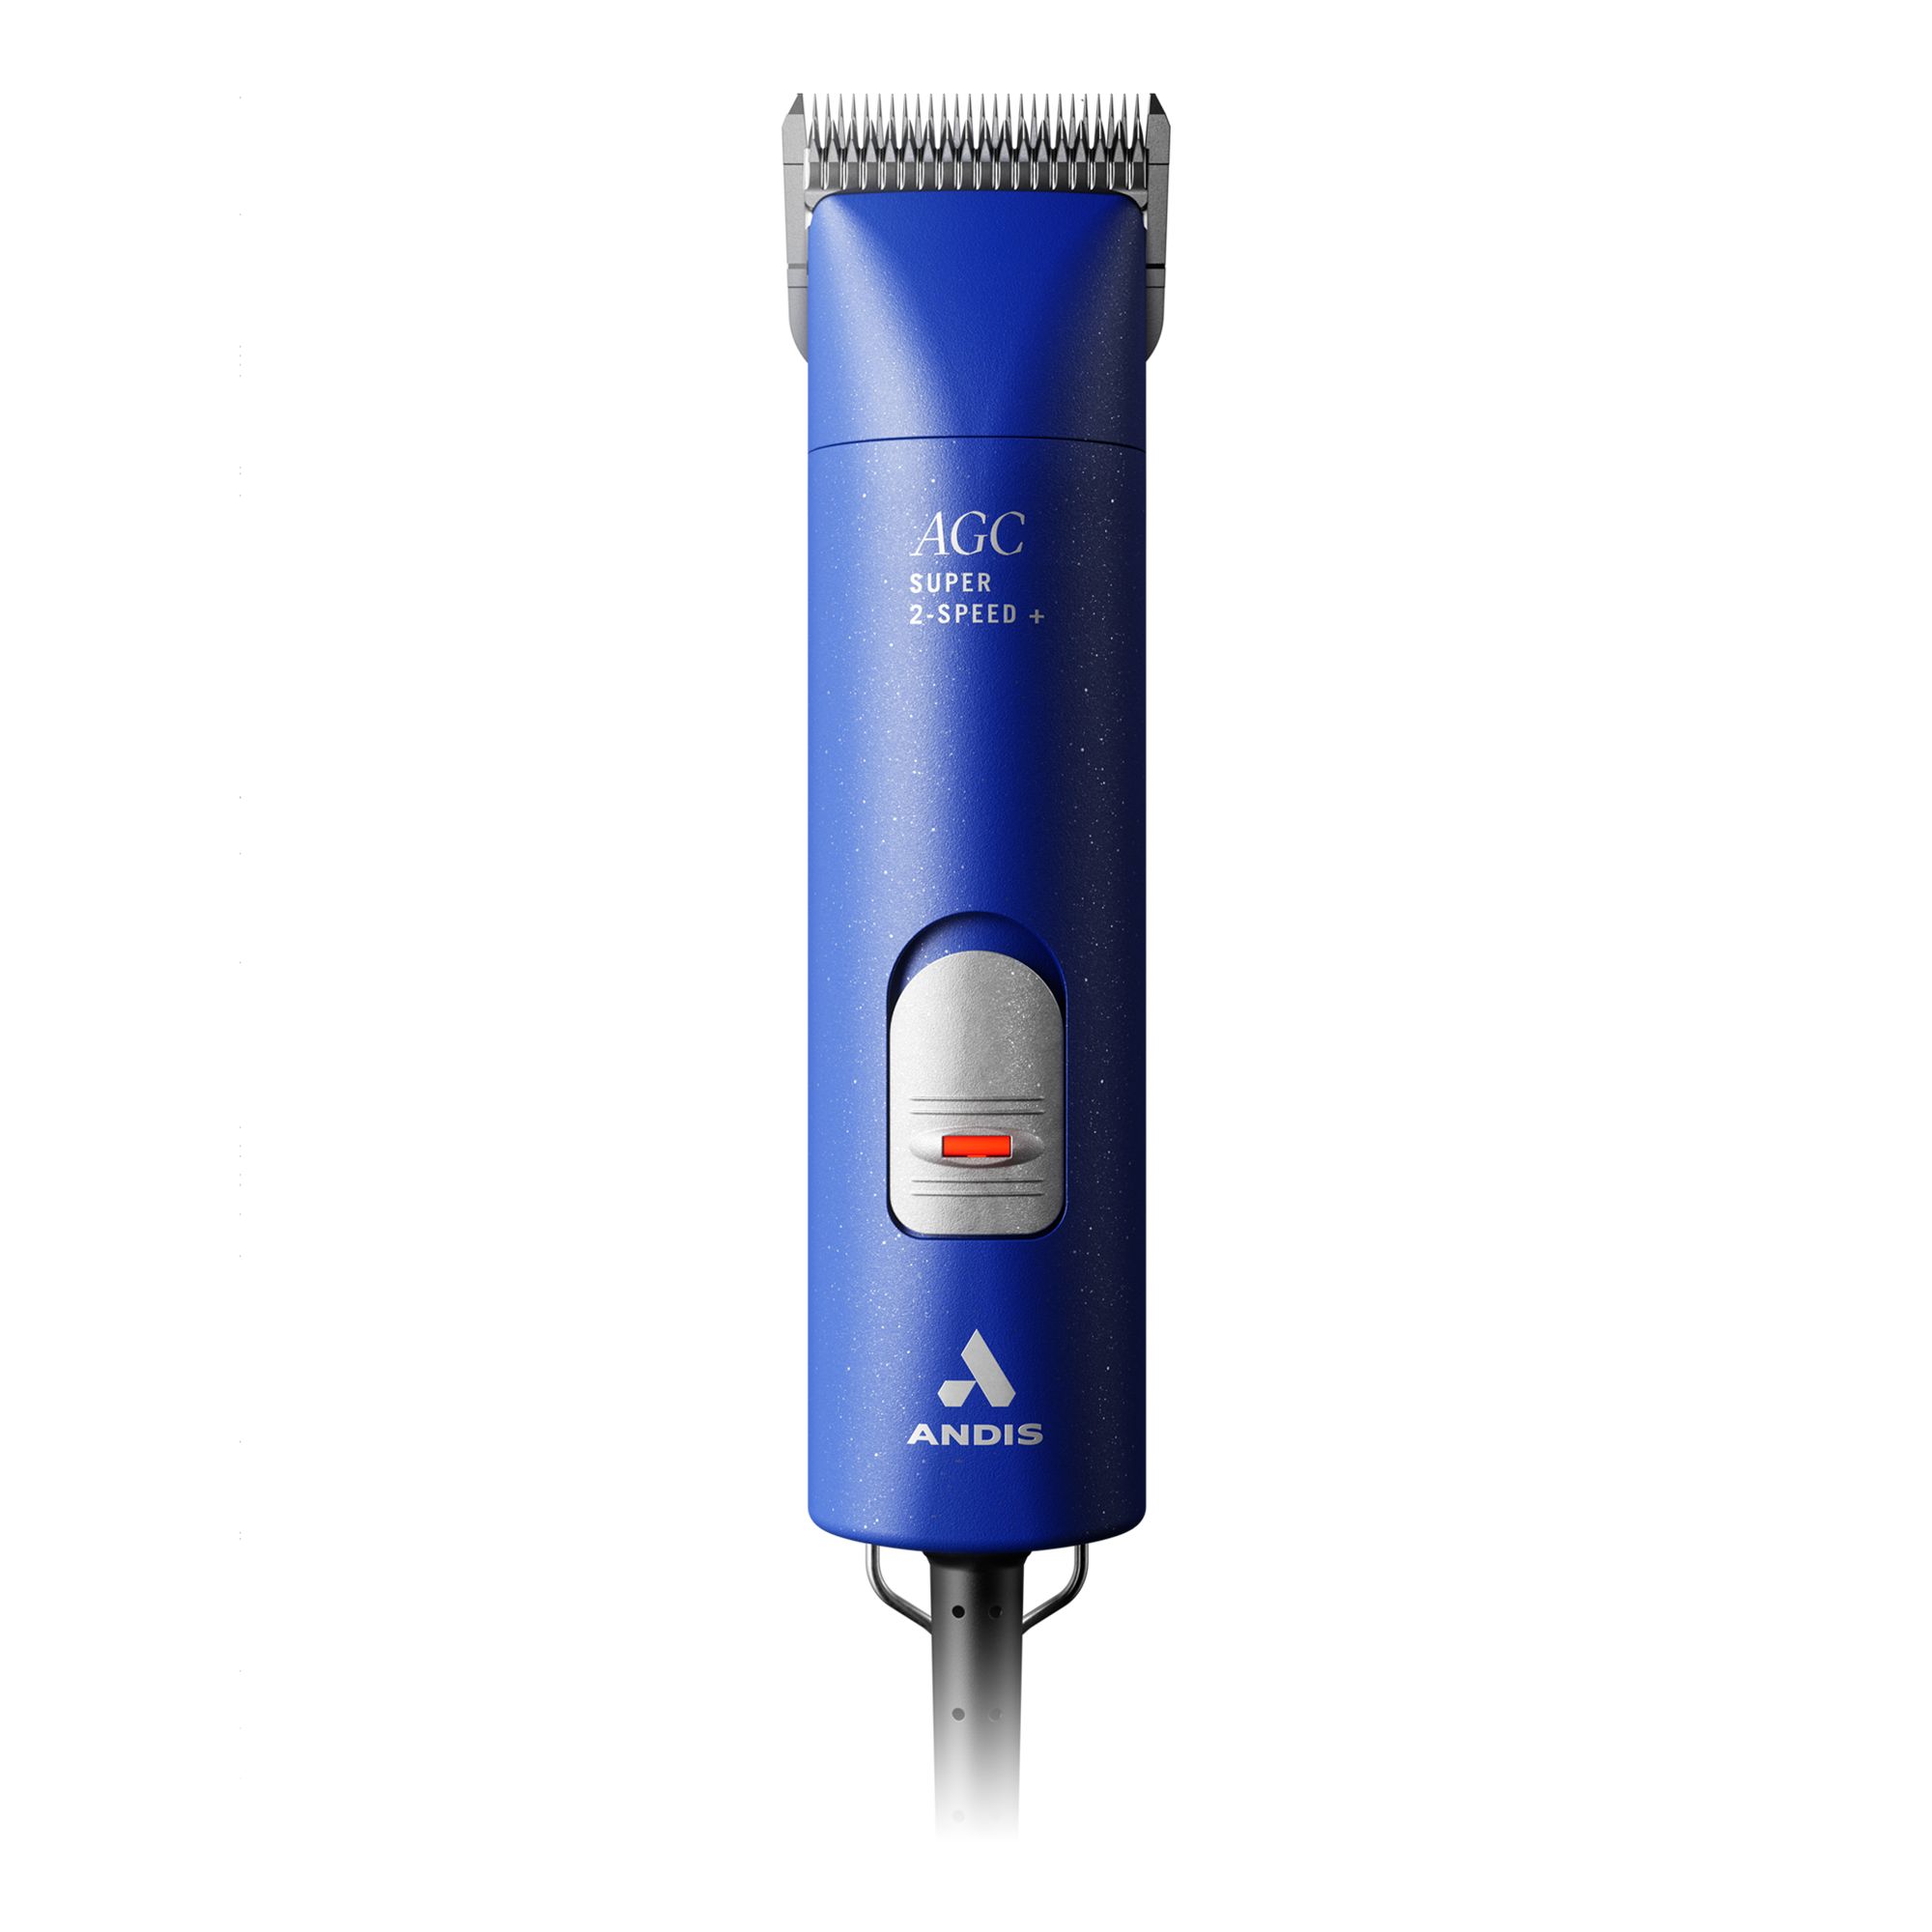 petsmart dog grooming clippers